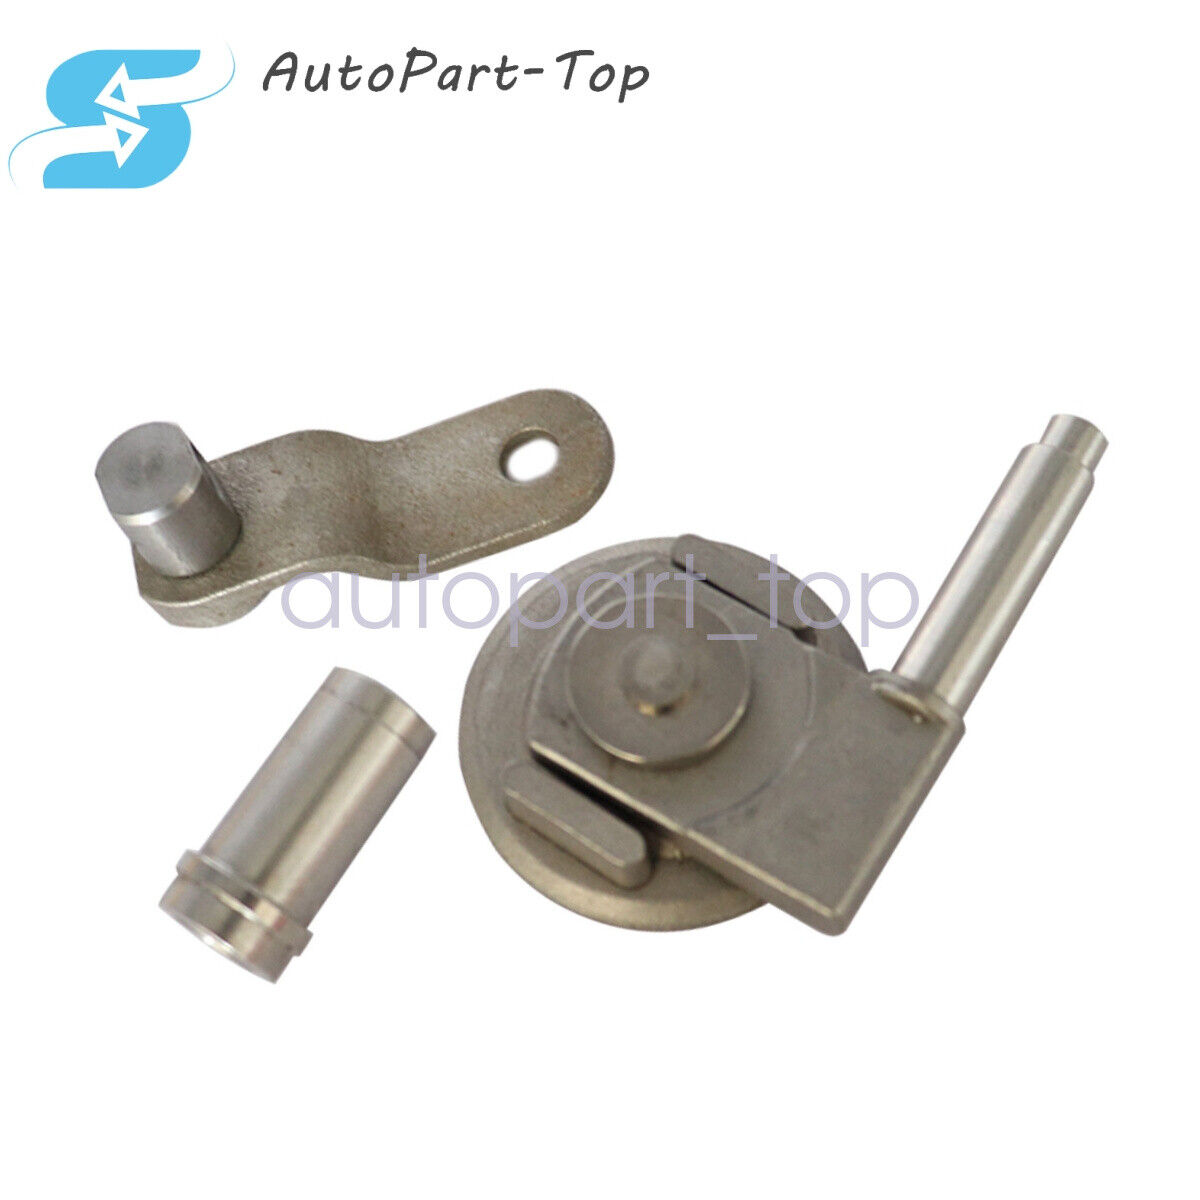 Suitable Fit Mercedes A45 AMG M133 Turbo Wastegate Rattle Flapper Repair